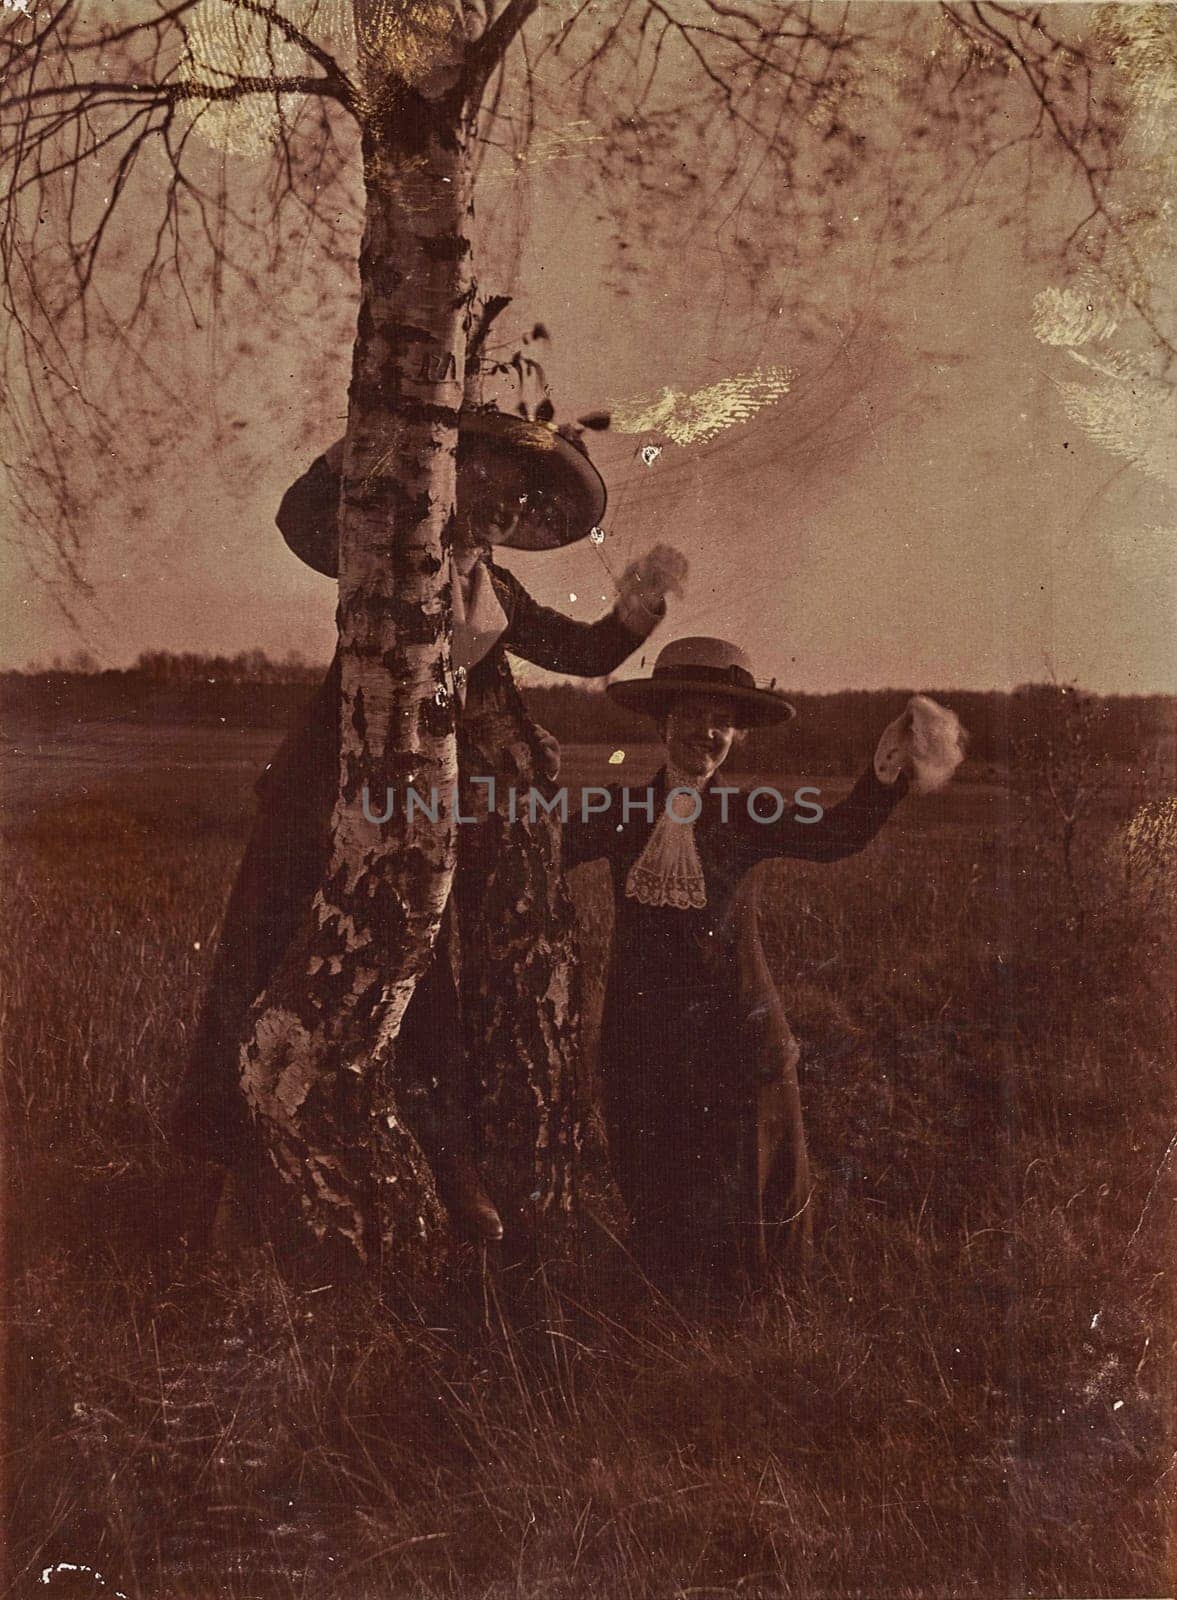 GERMANY - CIRCA 1910s: Vintage photo shows two ladies outdoor. Photo with sepia effect and has fingerprints imperfection. Black and white photography.